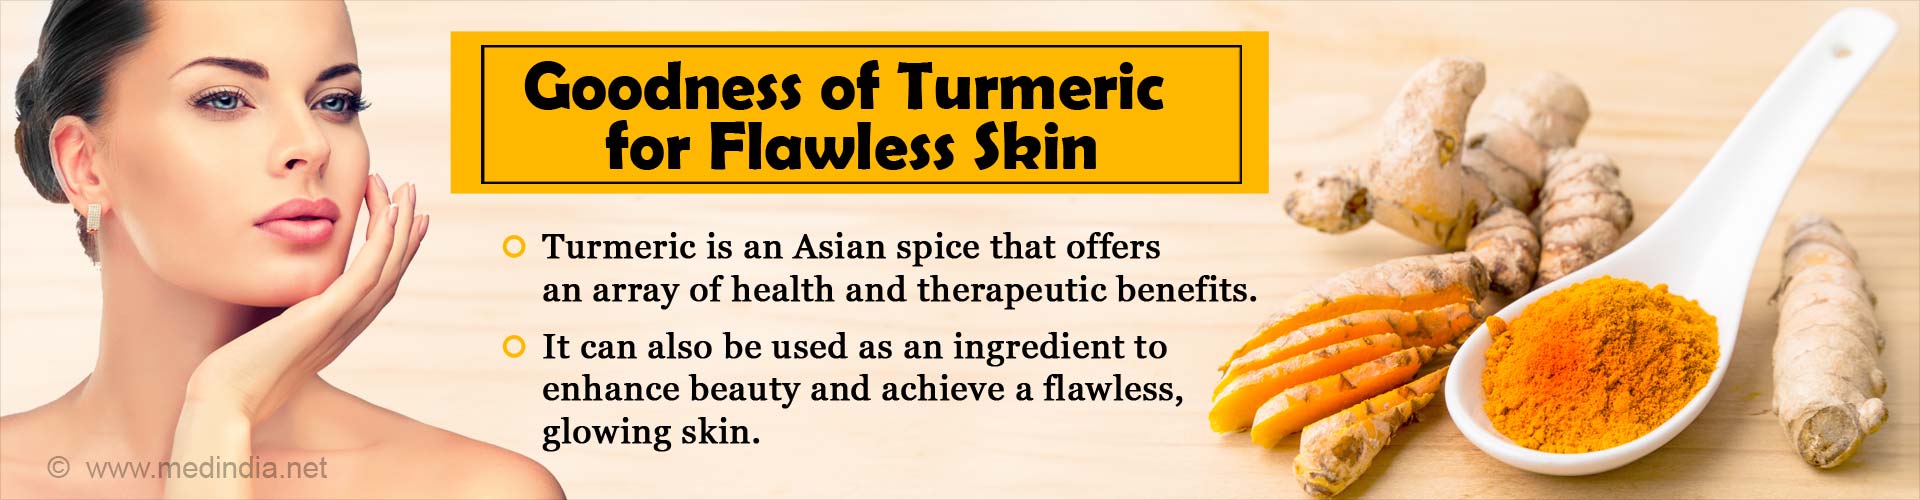 Goodness of Turmeric for Flawless Skin
- Turmeric is an Asian spice that offers an array of health and therapeutic benefits
- It can also be used as an ingredient to enhance beauty and achieve a flawless, slowing skin